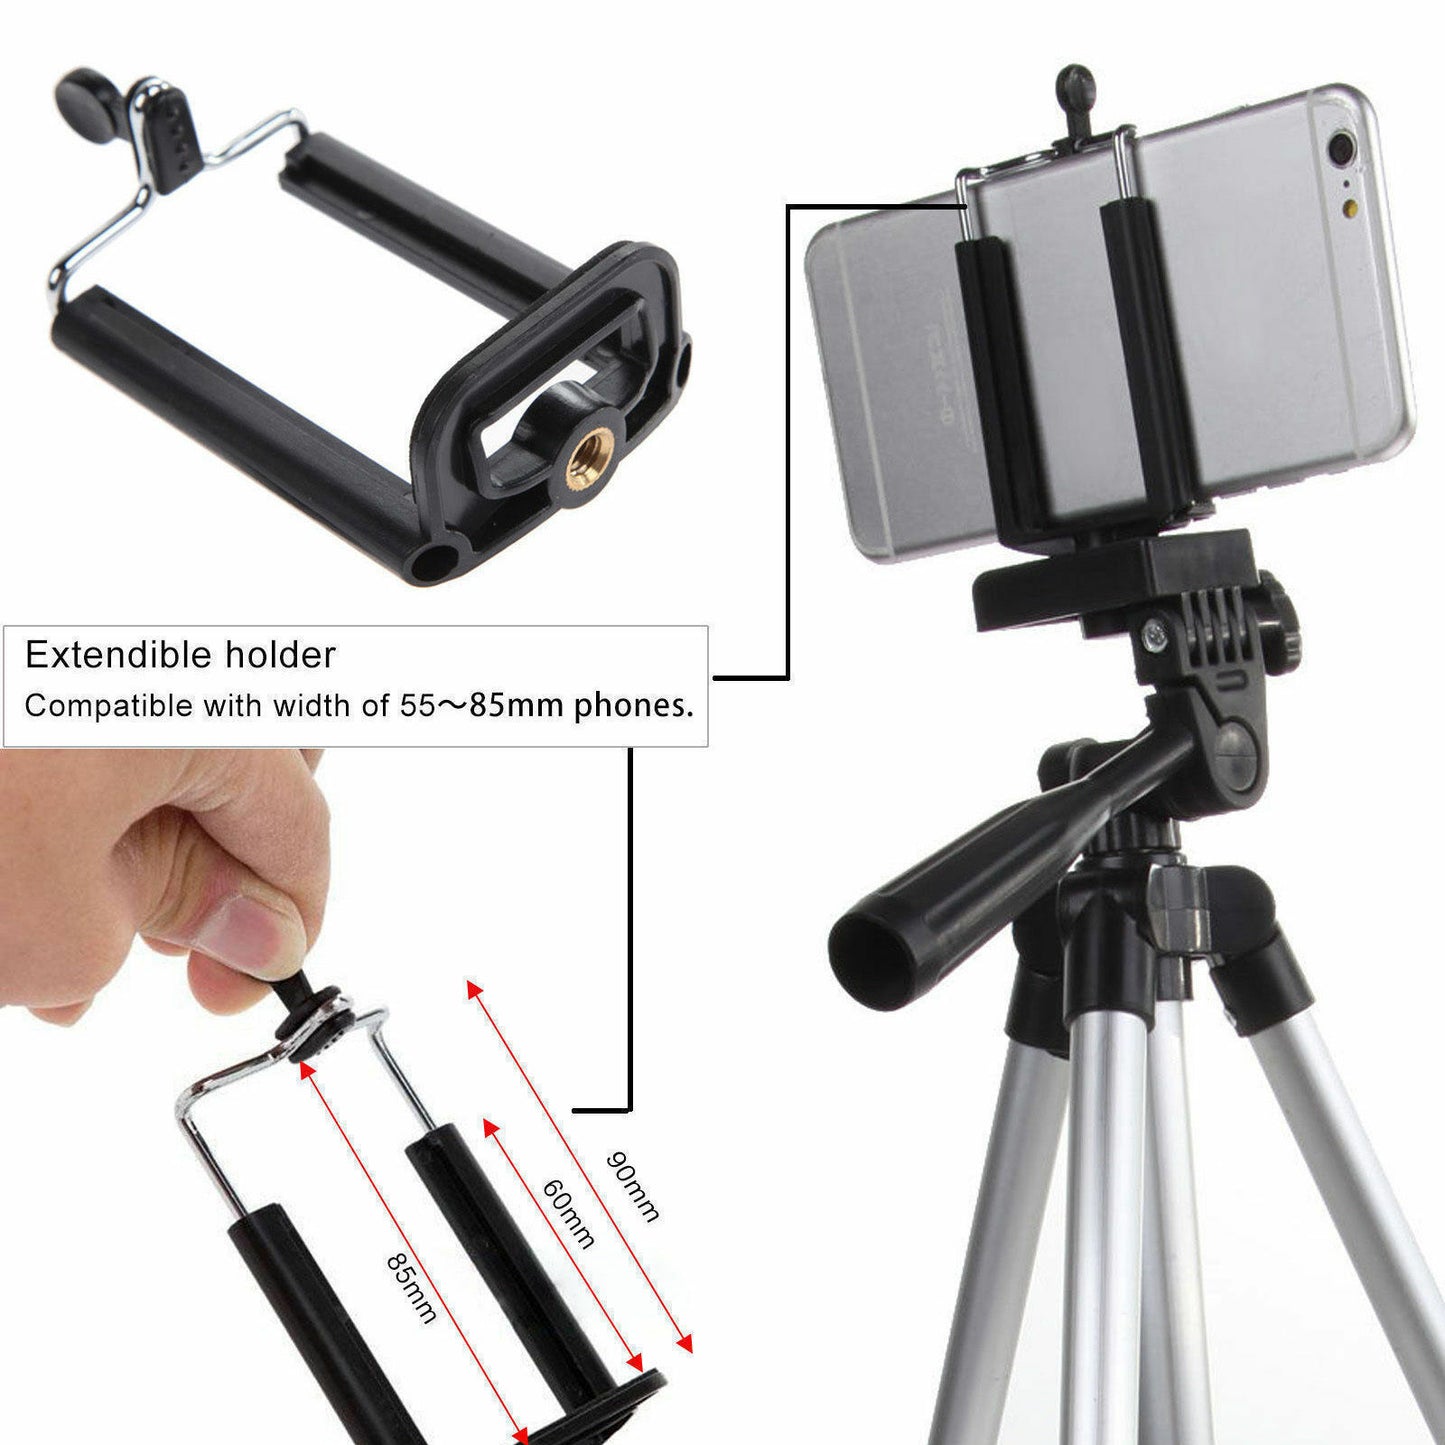 Professional Camera Tripod Stand Holder Mount For Cell Phone, Portable Tripod, Mobile Phone Live Stream Holder, Camera Tripod